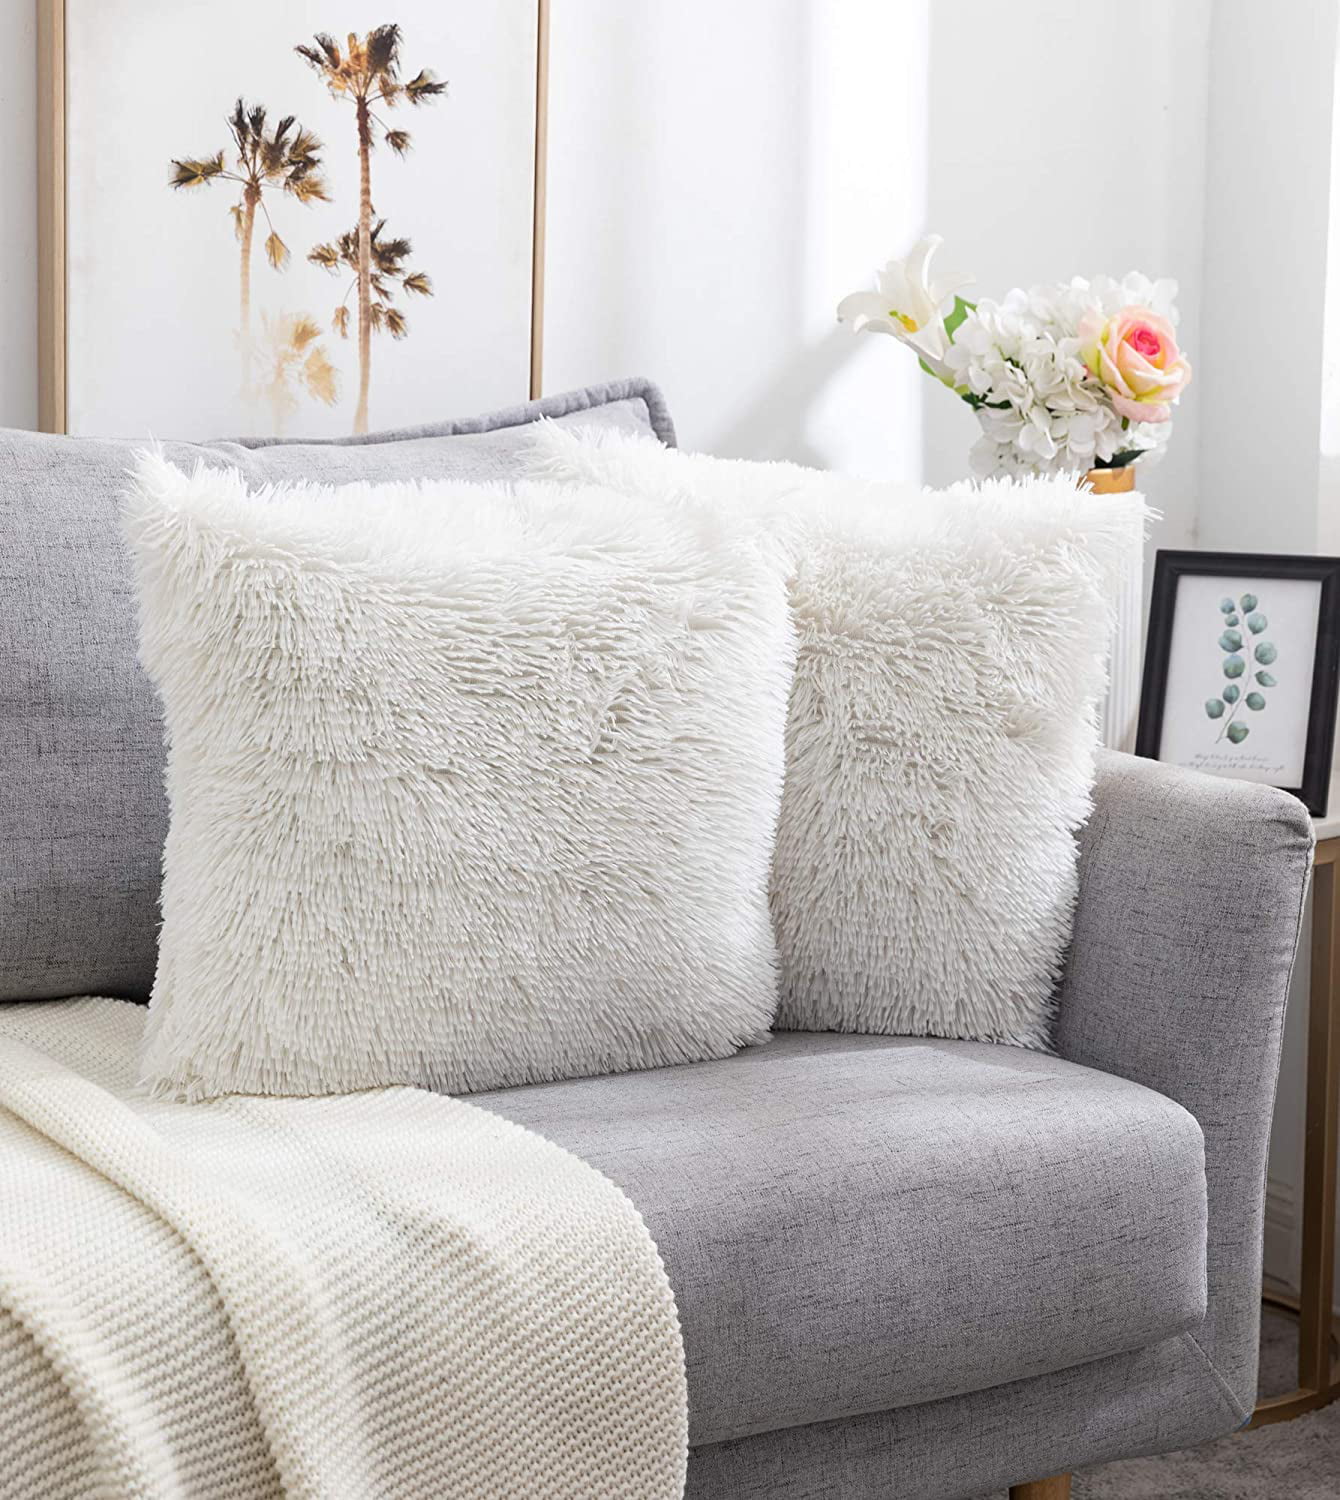 Peshtemania White Fluffy Pillows (2packs 20x20) Cute Faux Fur Pillow Case  Decorative for Couch Sofa Fuzzy Throw Pillows Covers for Bedroom Living